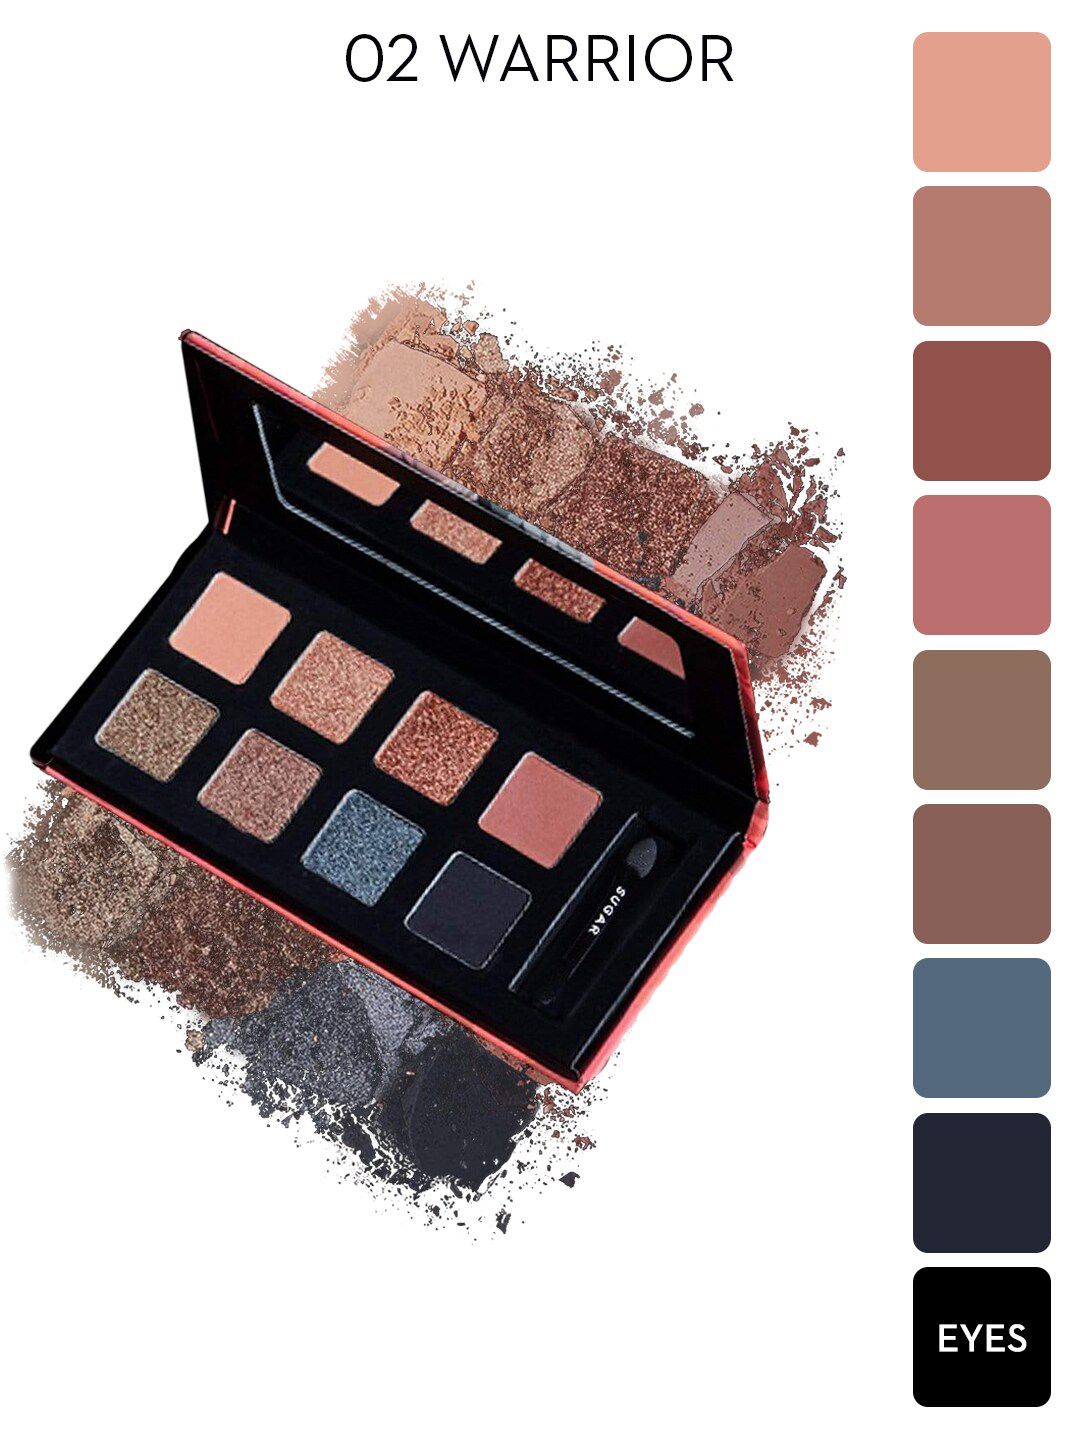 SUGAR Cosmetics Blend The Rules Eyeshadow Palette - 02 Warrior Price in India